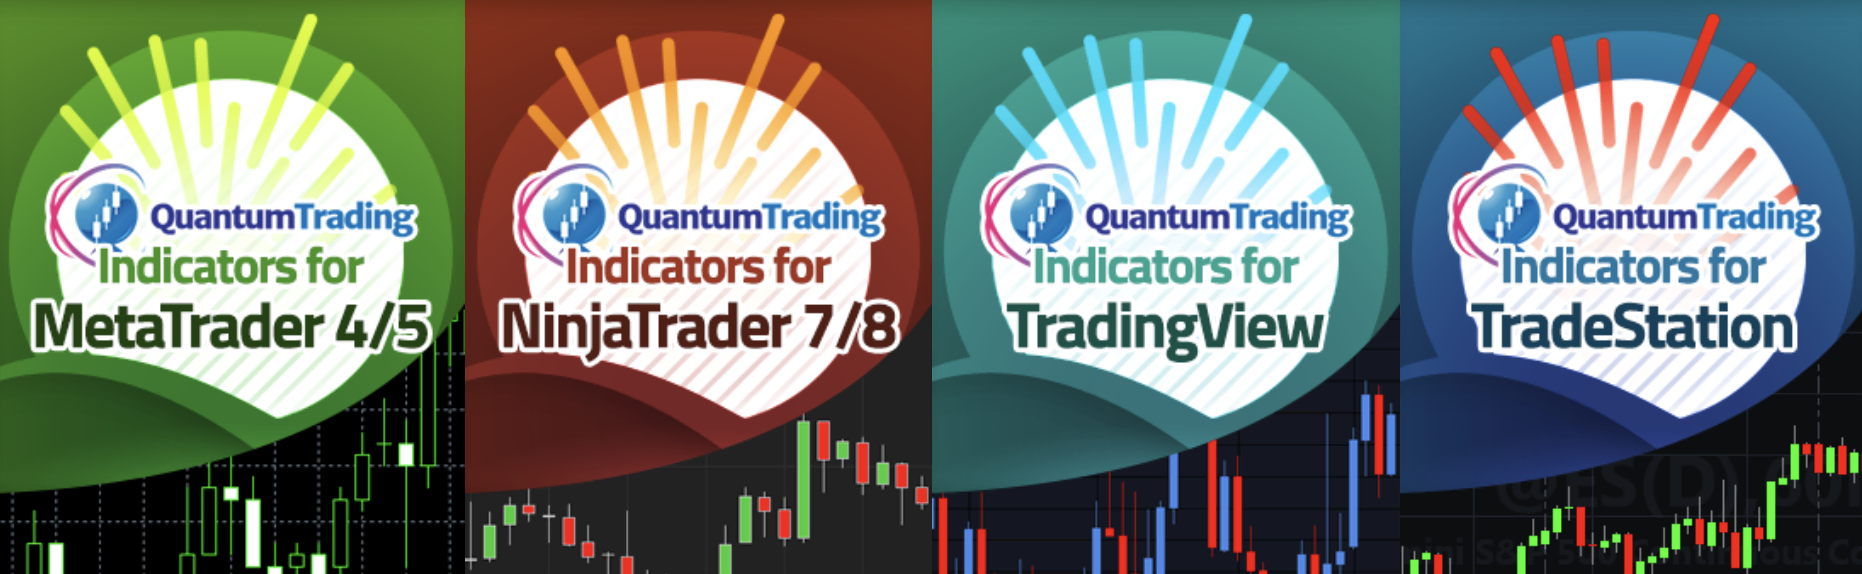 Available indicators on Quantum Trading